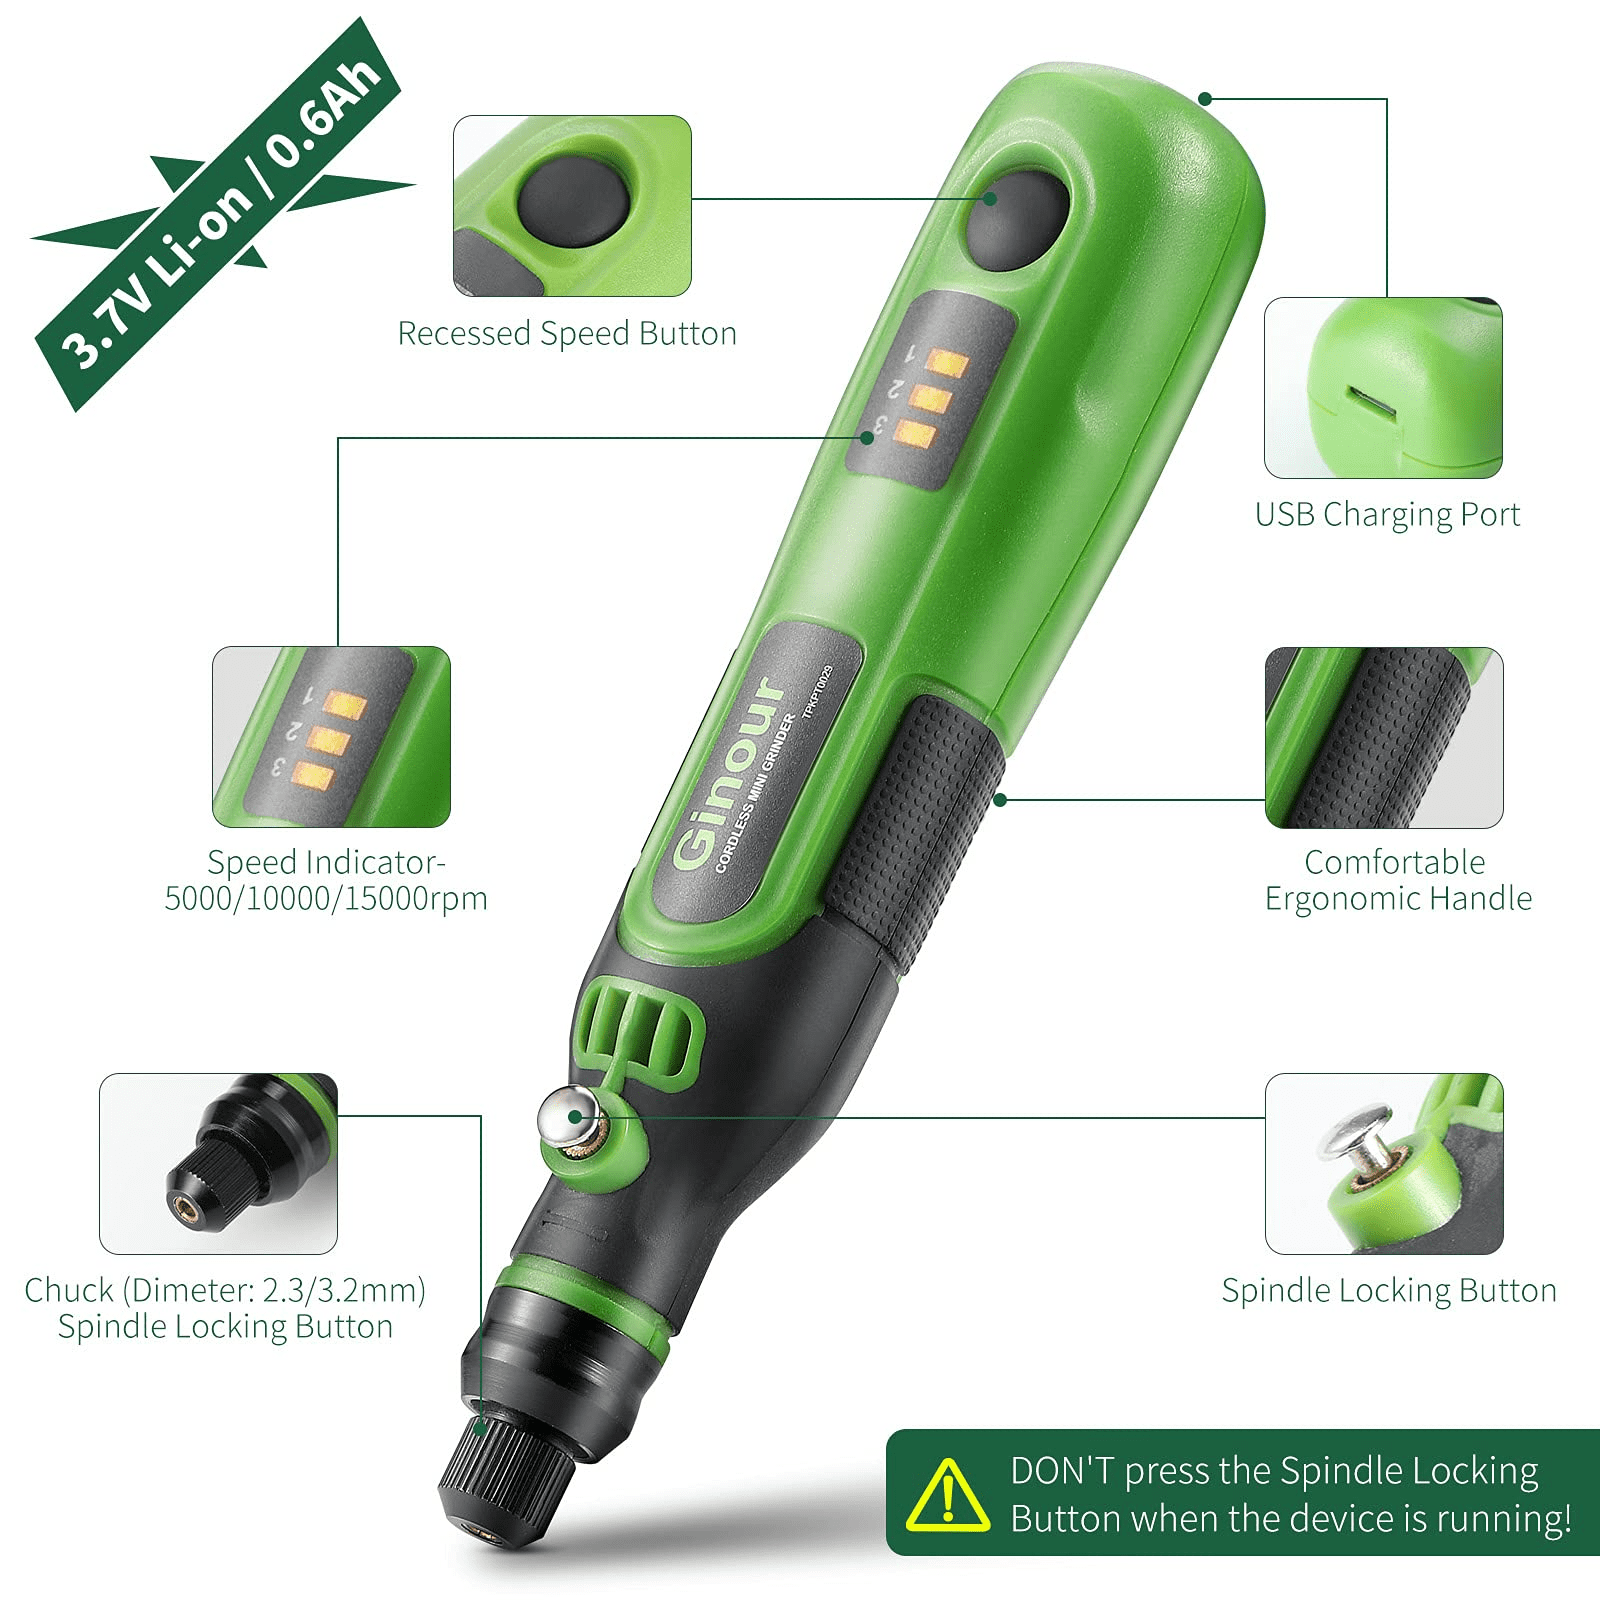 RUSUO Mini Grinder Tool,Multifunctional Mini Handheld Electric Grinder Set  6000-15000rpm Power Rotary Tool Kit Rechargeable 3 in 1 Polisher Driller